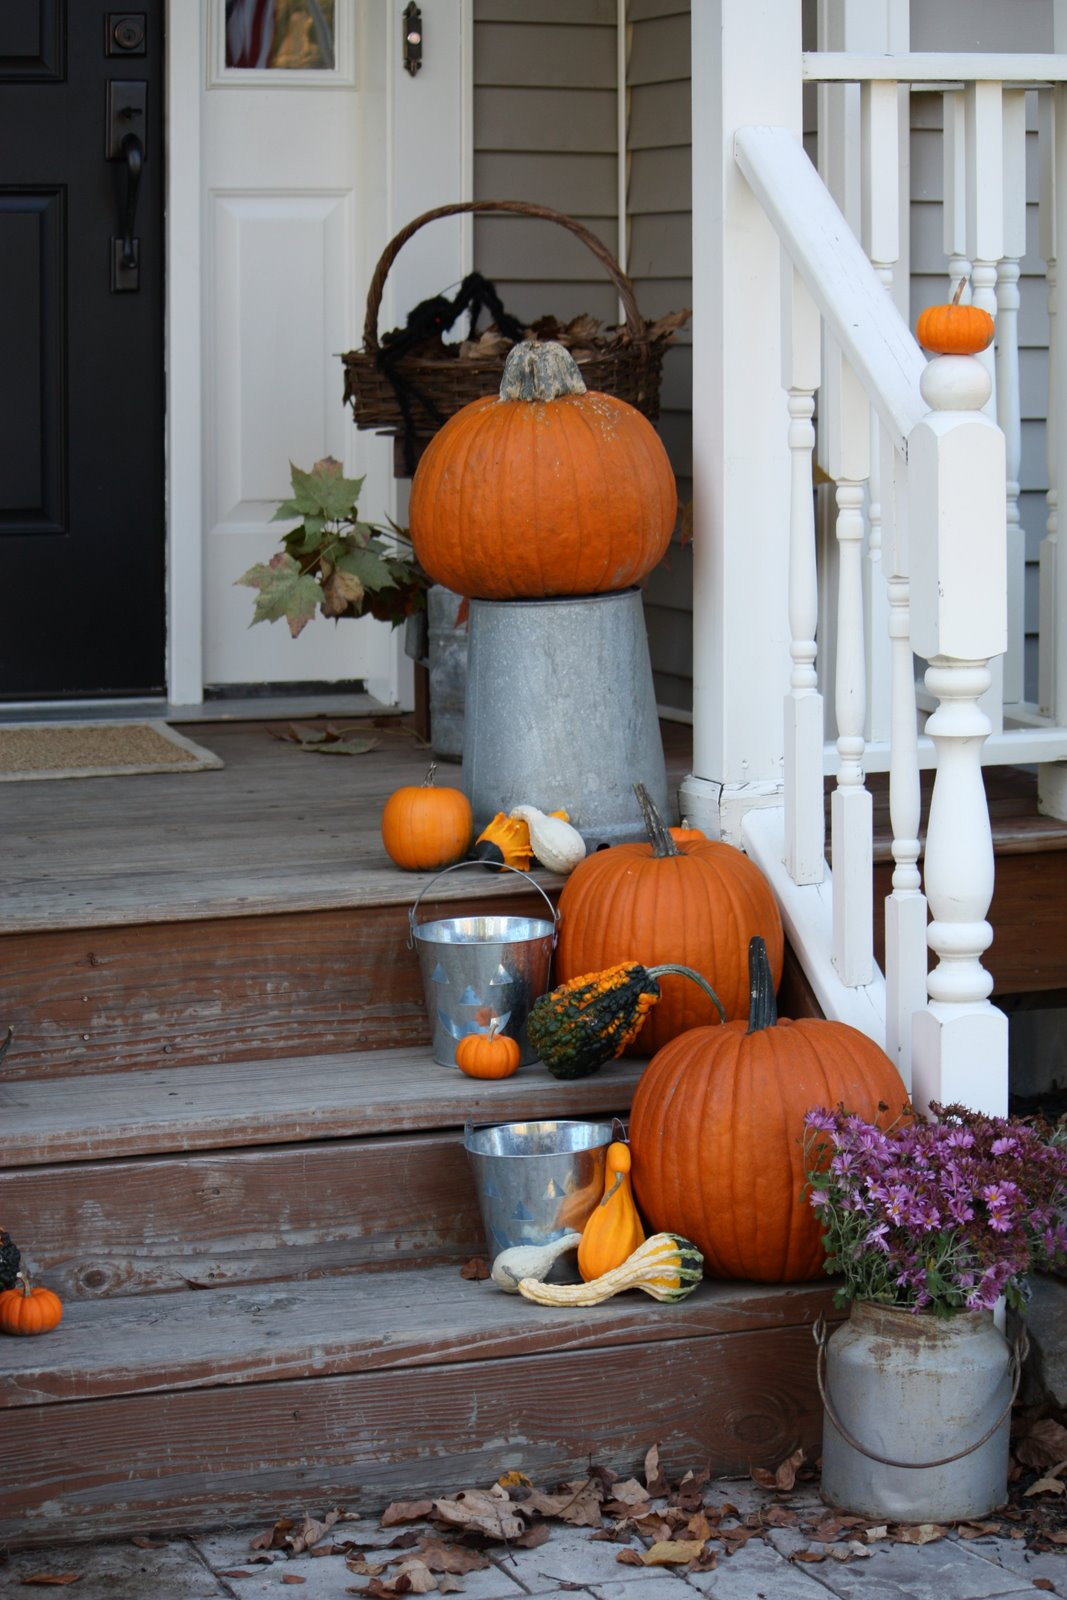 Outdoor Fall Decor
 5 Easy Fall Decorating Ideas for your Home